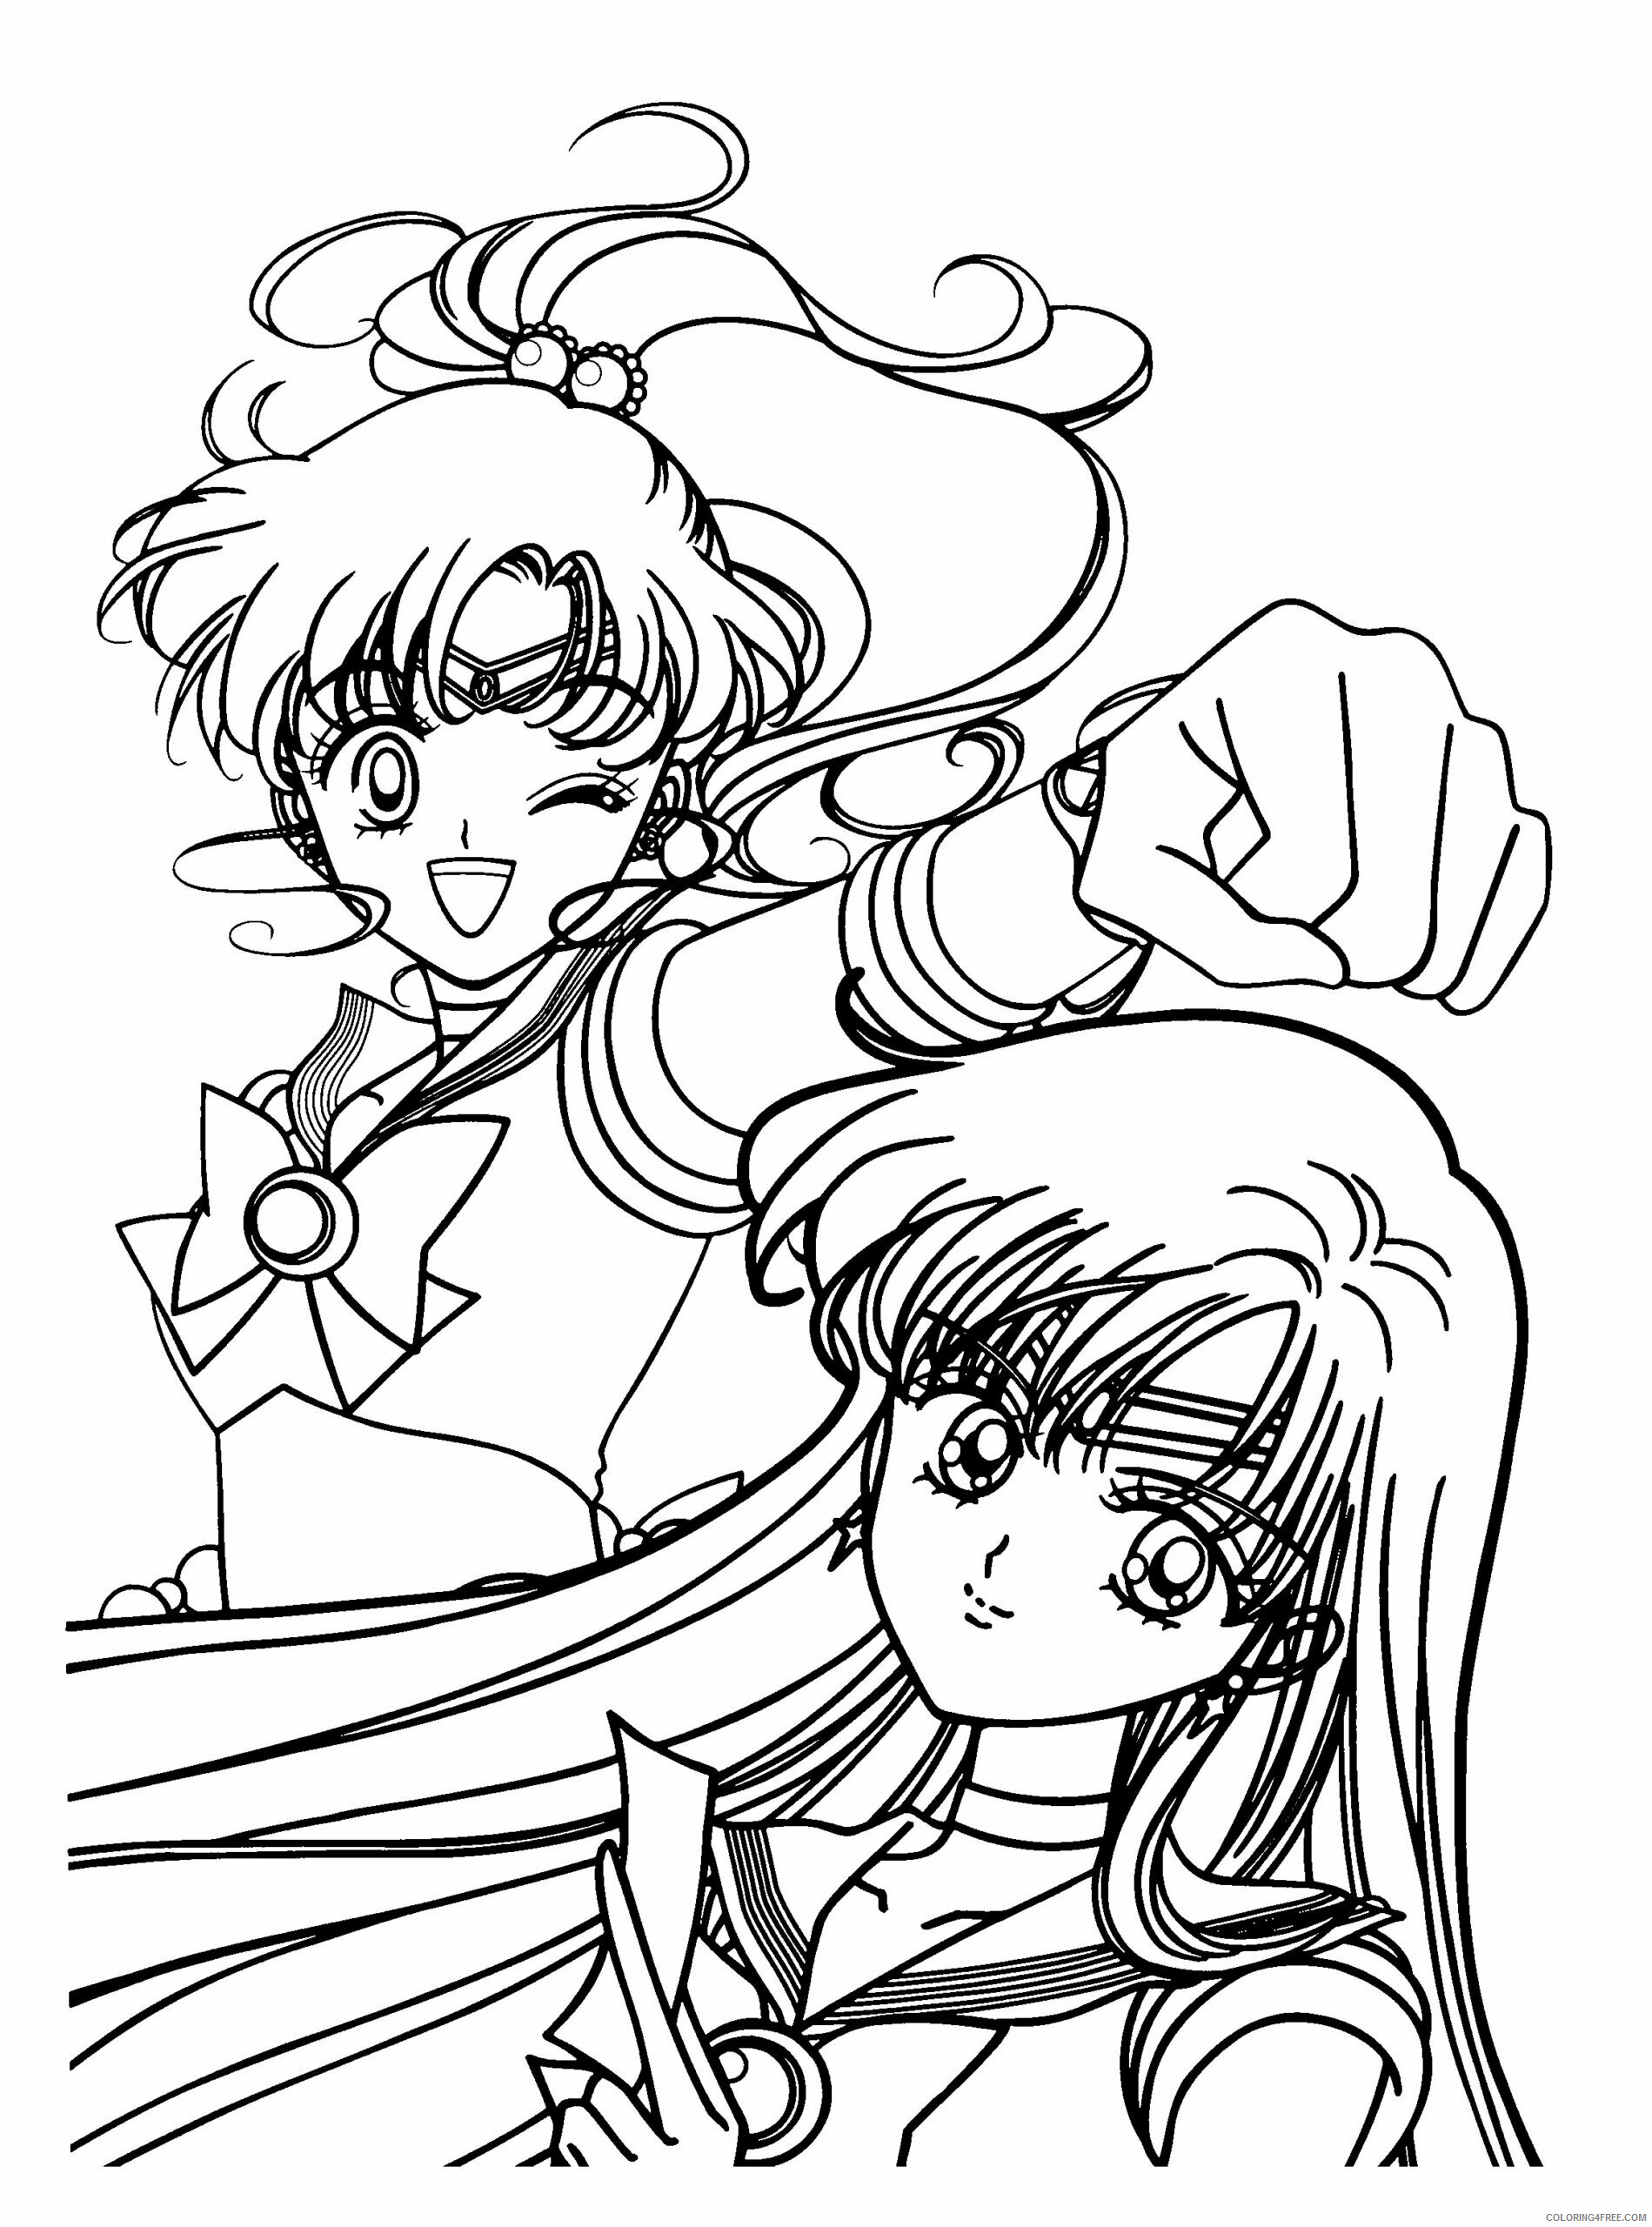 Sailor Moon Printable Coloring Pages Anime sailormoon 11 2021 1019 Coloring4free